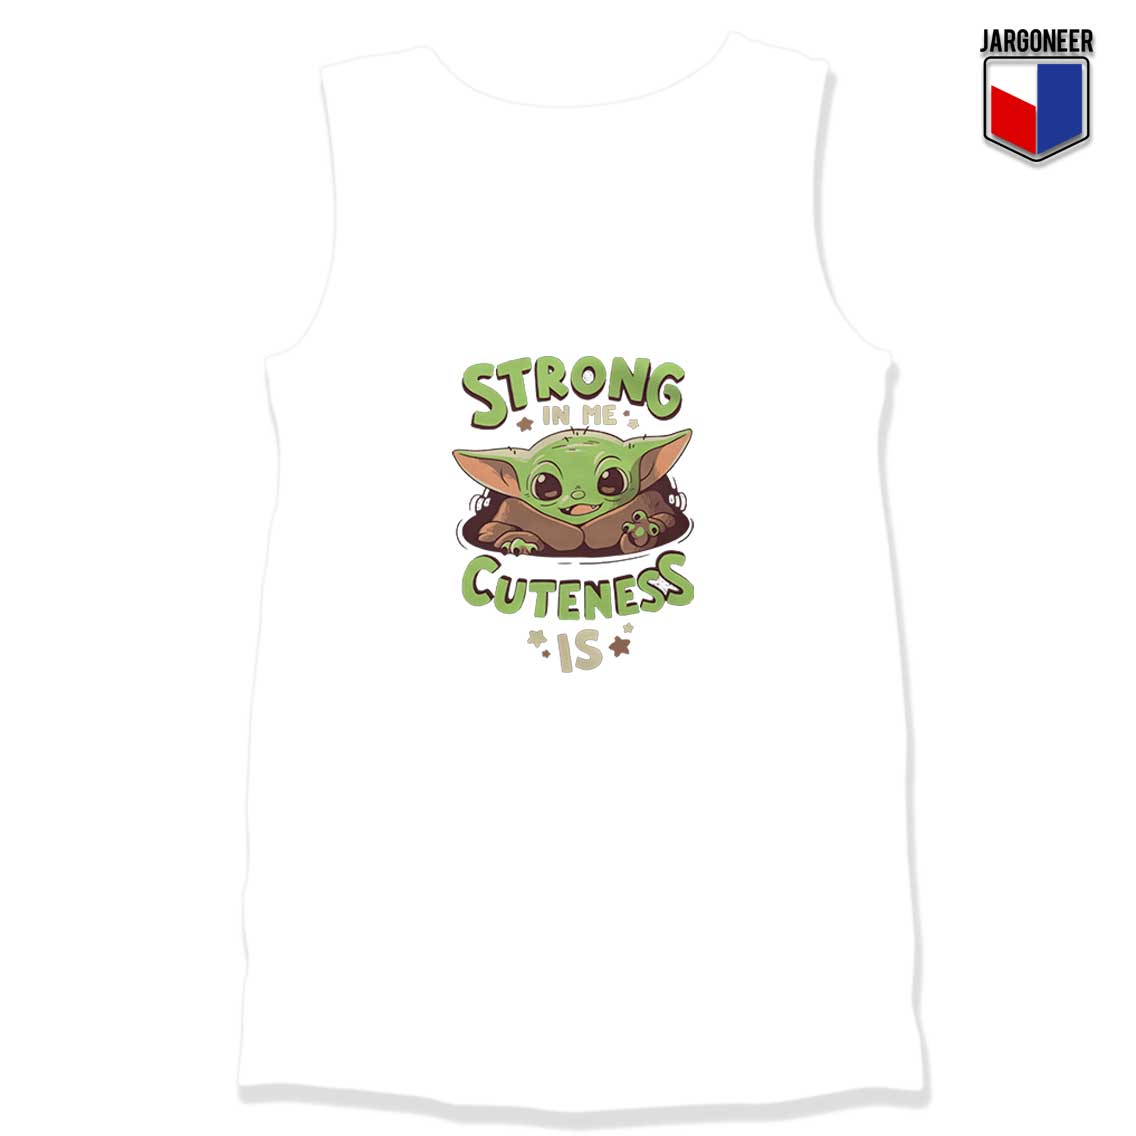 Strong In Me Cuteness Is Yoda Tank Top - Shop Unique Graphic Cool Shirt Designs